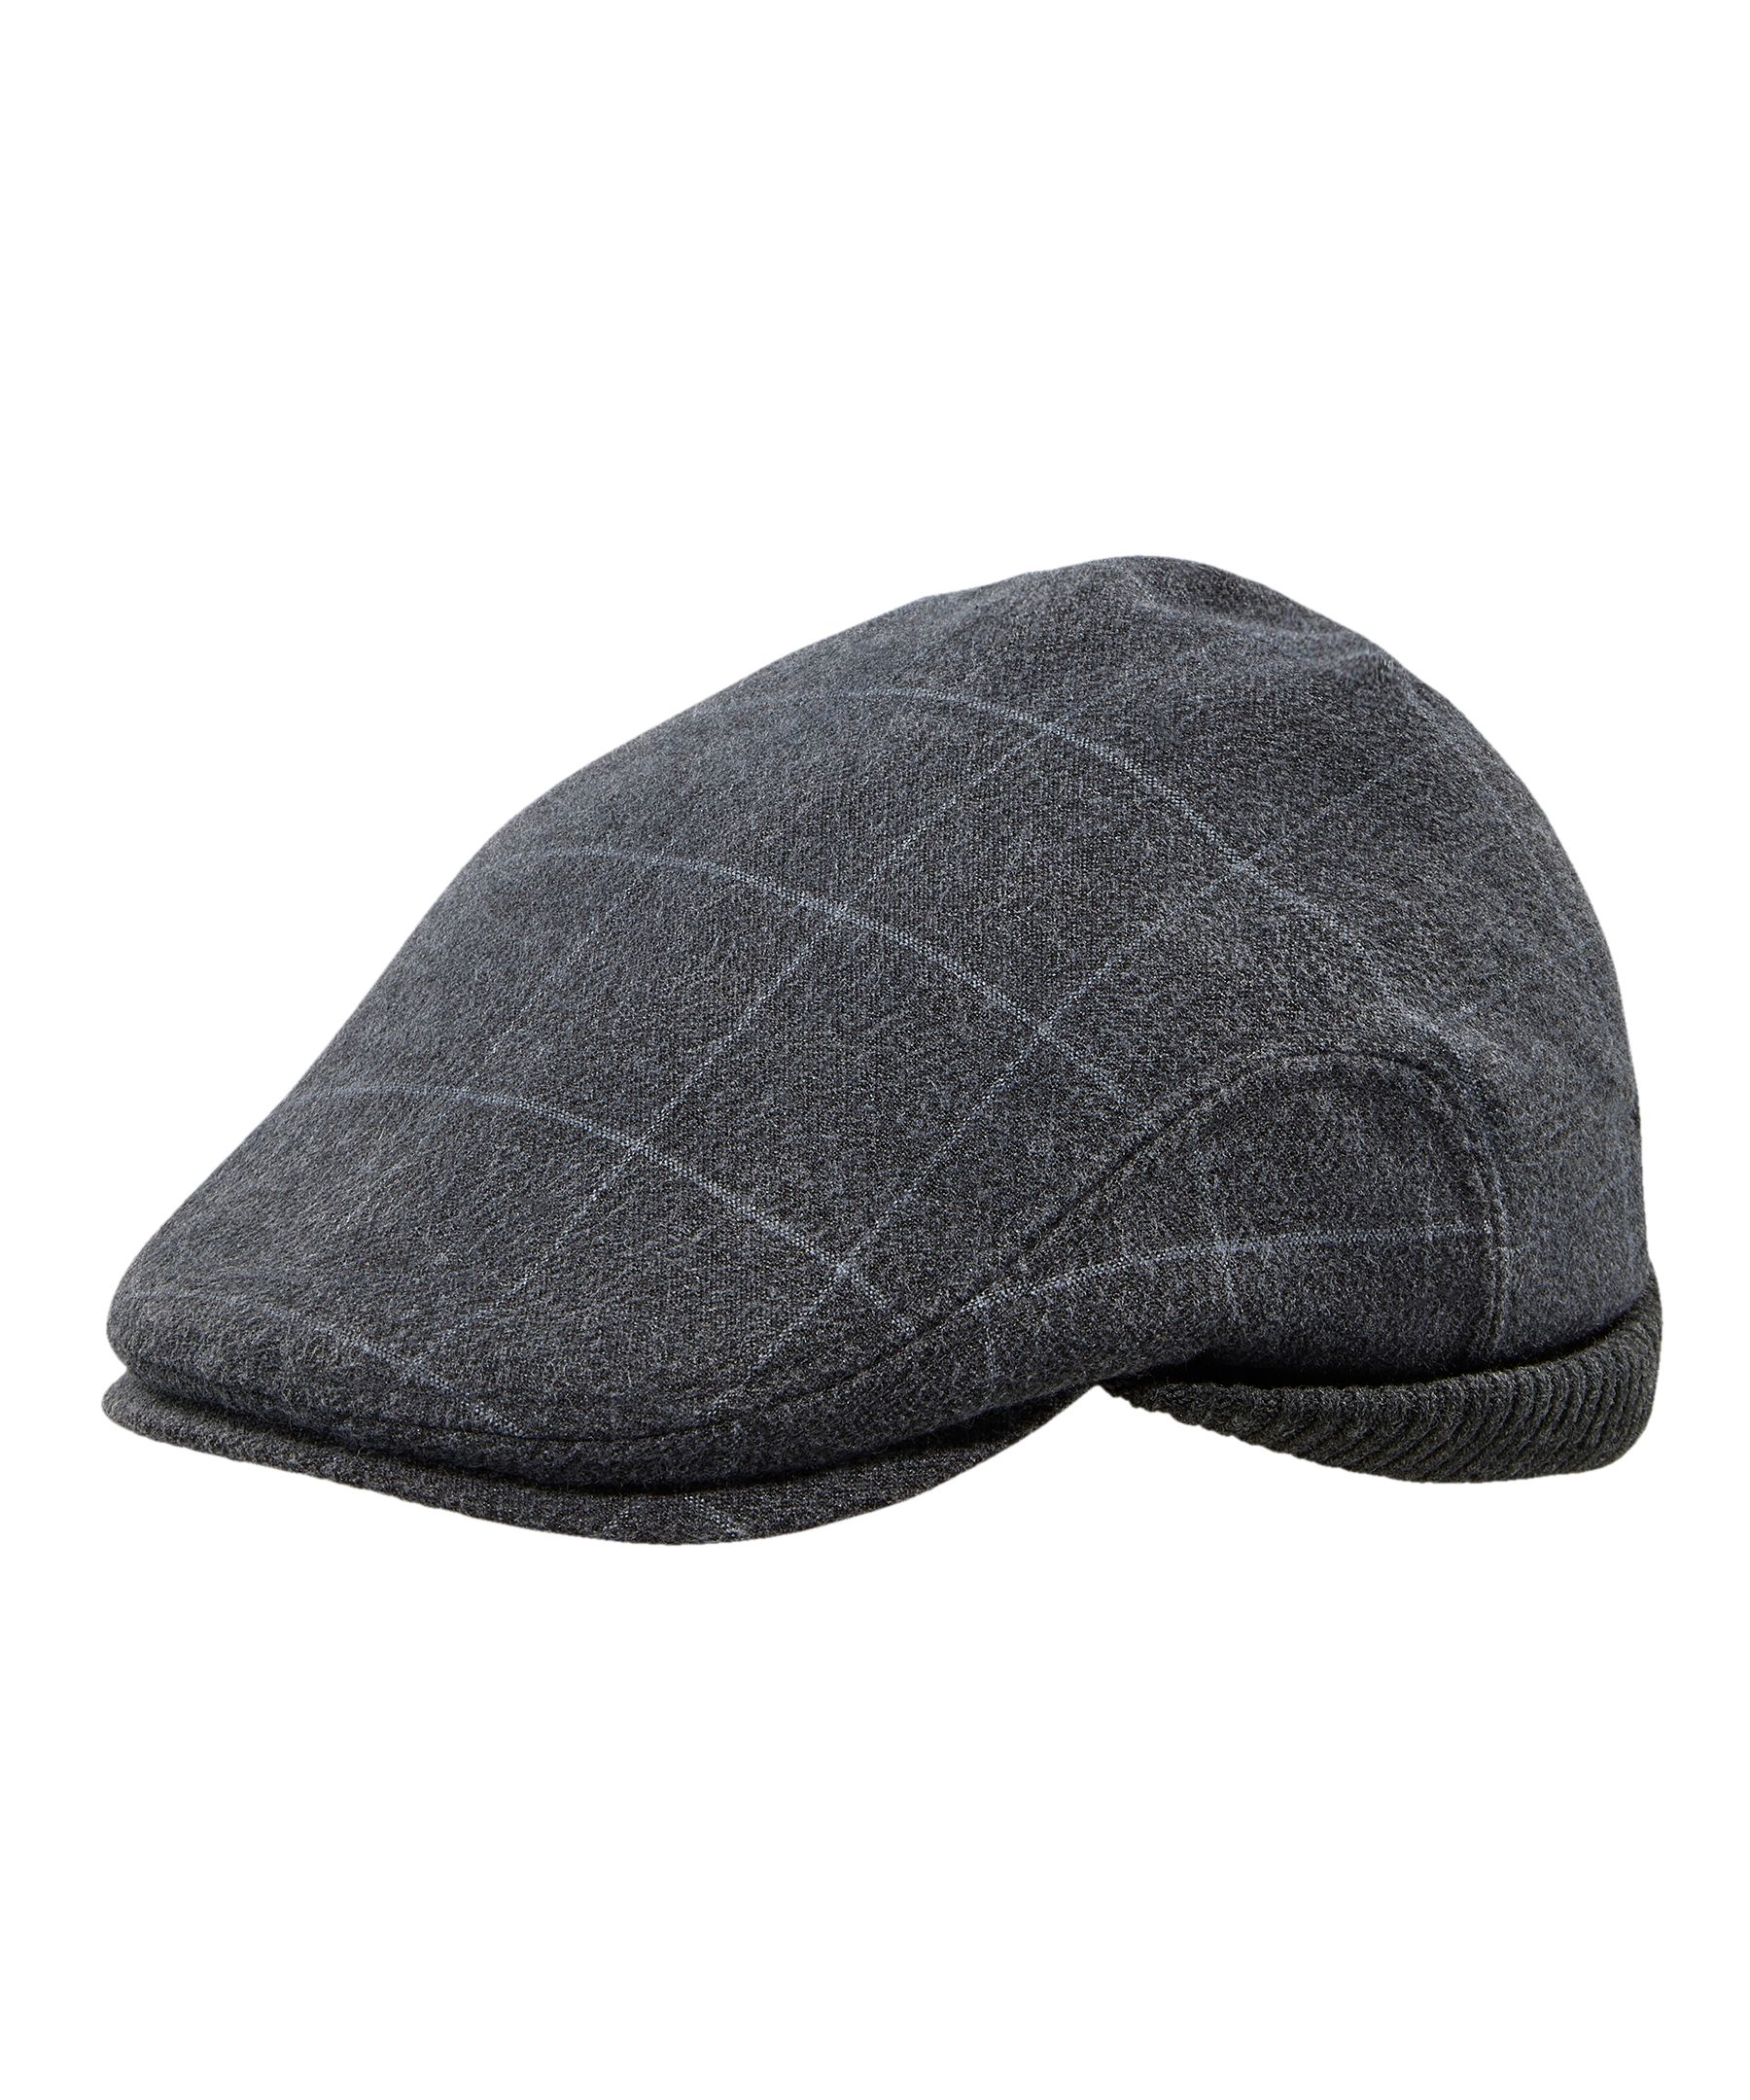 WindRiver Men's Plaid Flat Cap with Ear Flaps | Marks